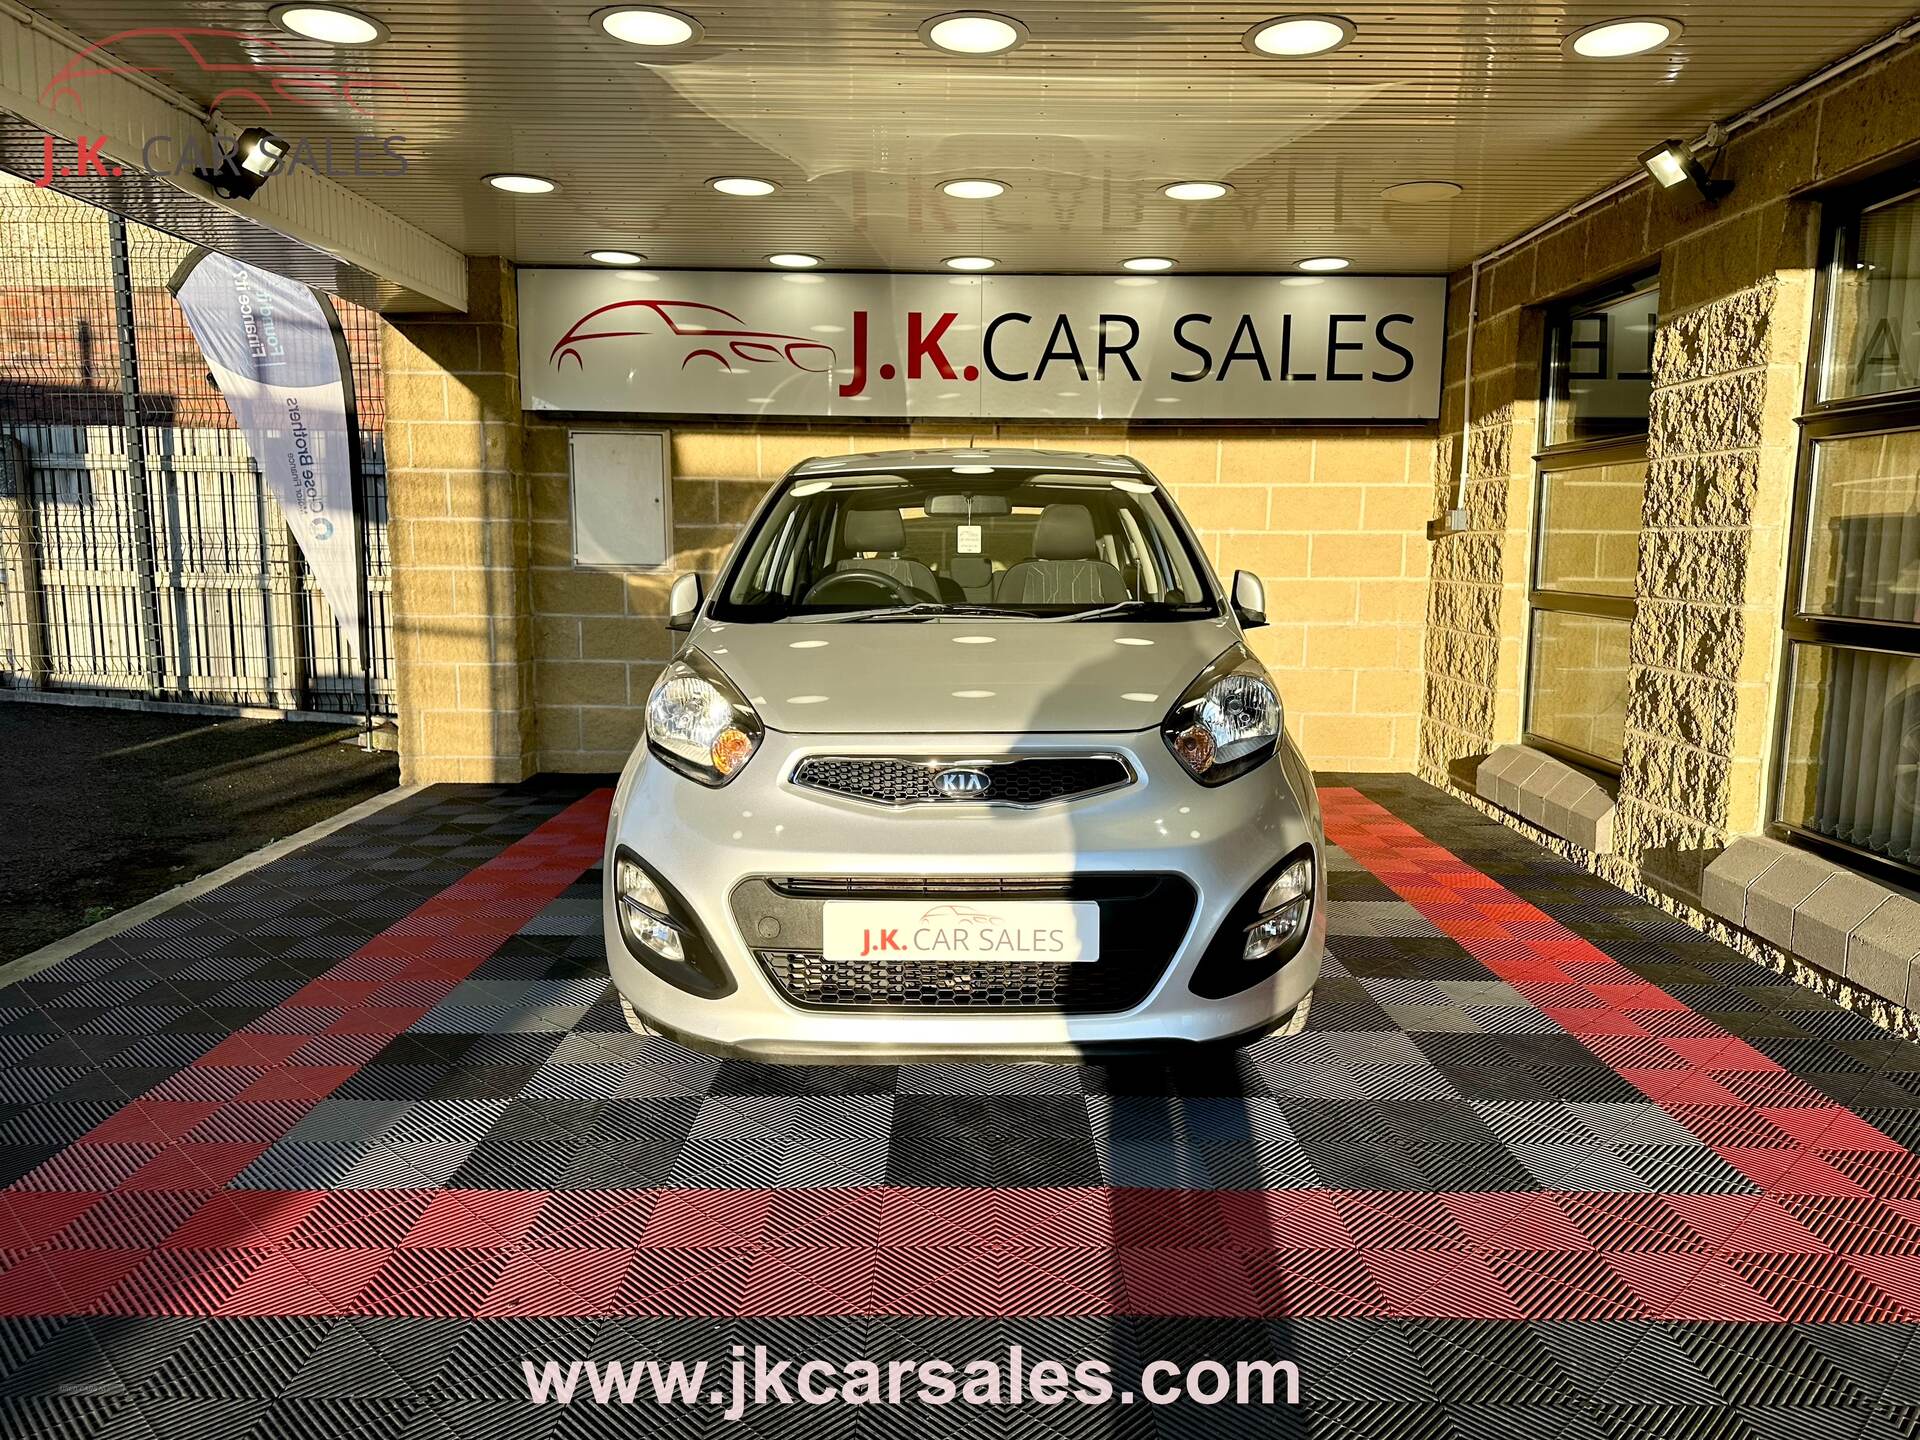 Kia Picanto HATCHBACK in Tyrone